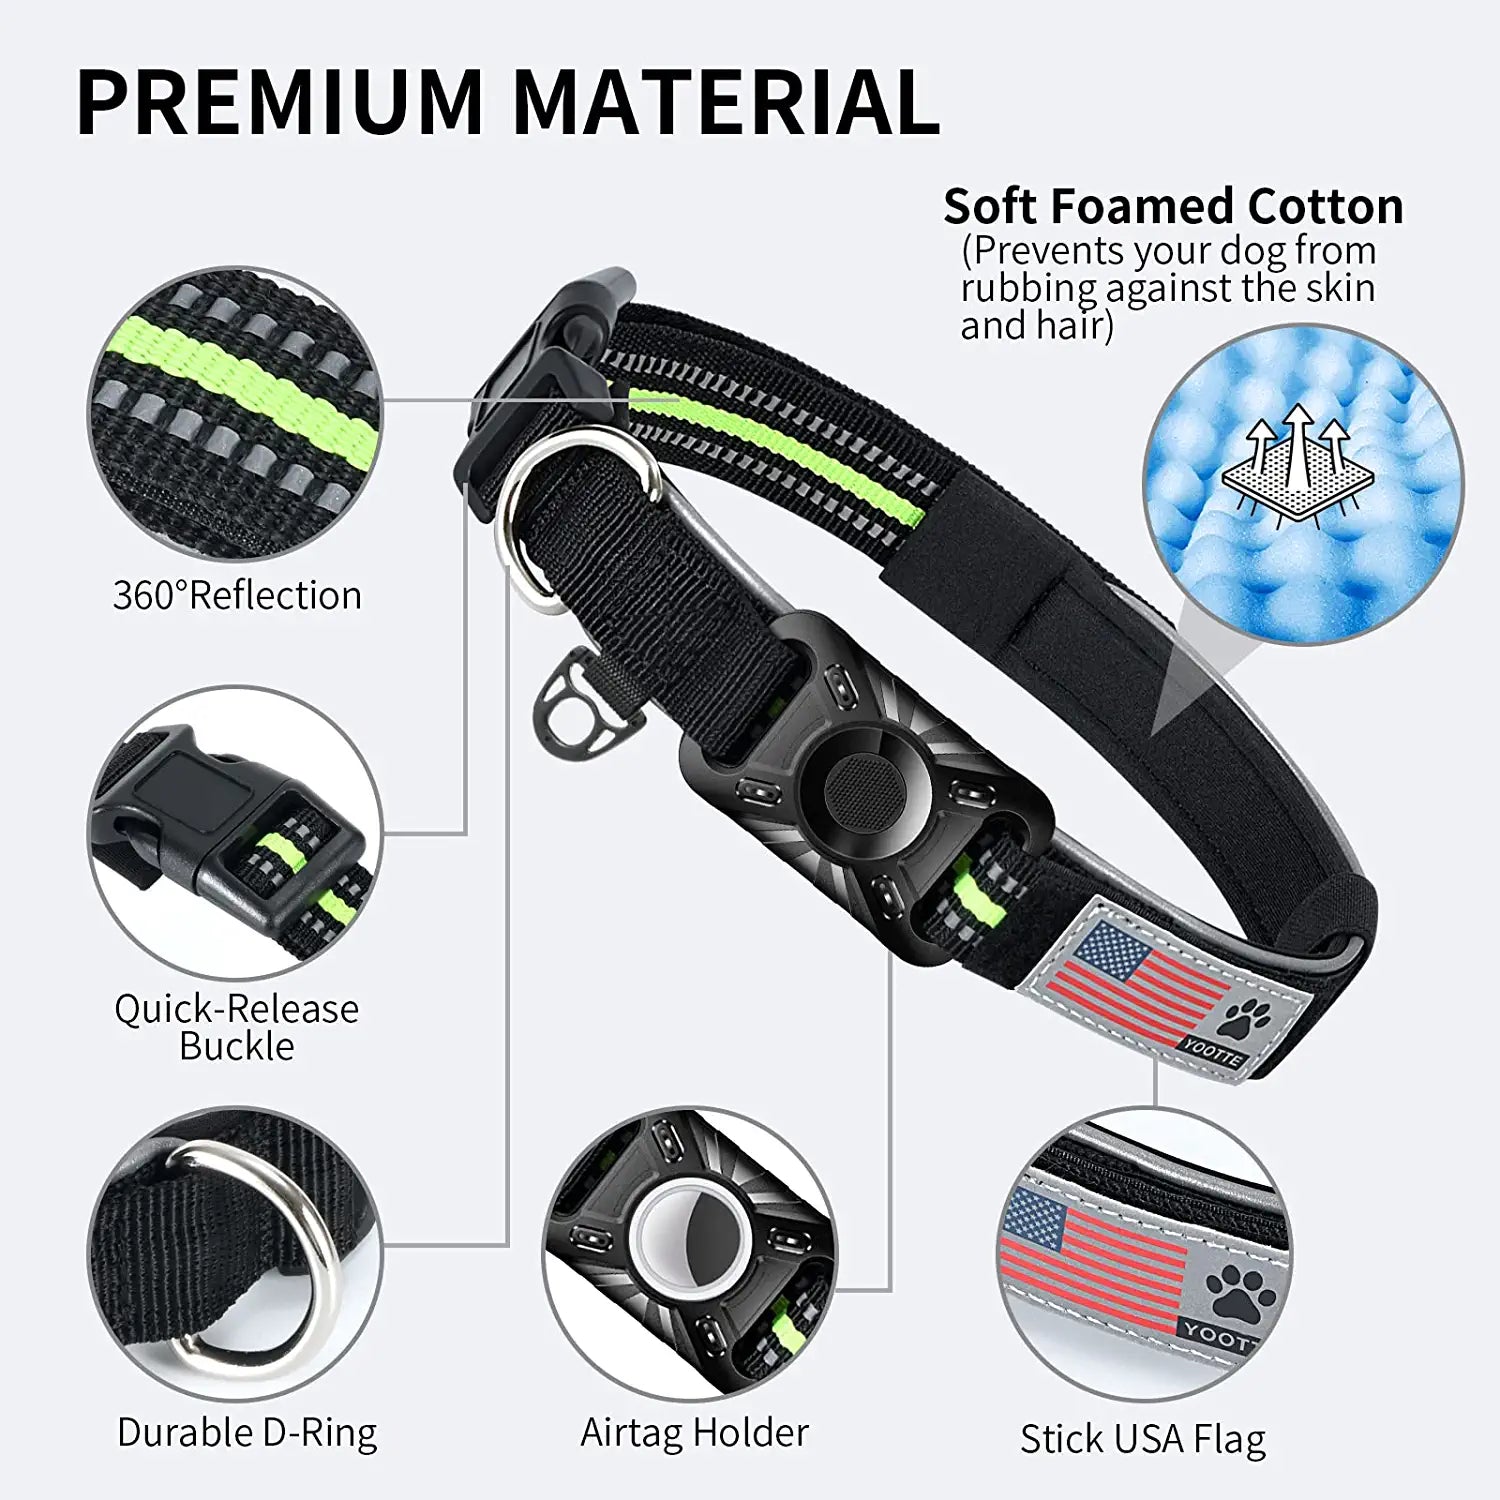 Reflective Airtag Dog Collar with Holder Case, Padded Breathable Dog Collar with Protective Waterproof Airtag Holder Case, Adjustable Nylon Pet Collar GPS Dog Collar for Medium and Large Dogs